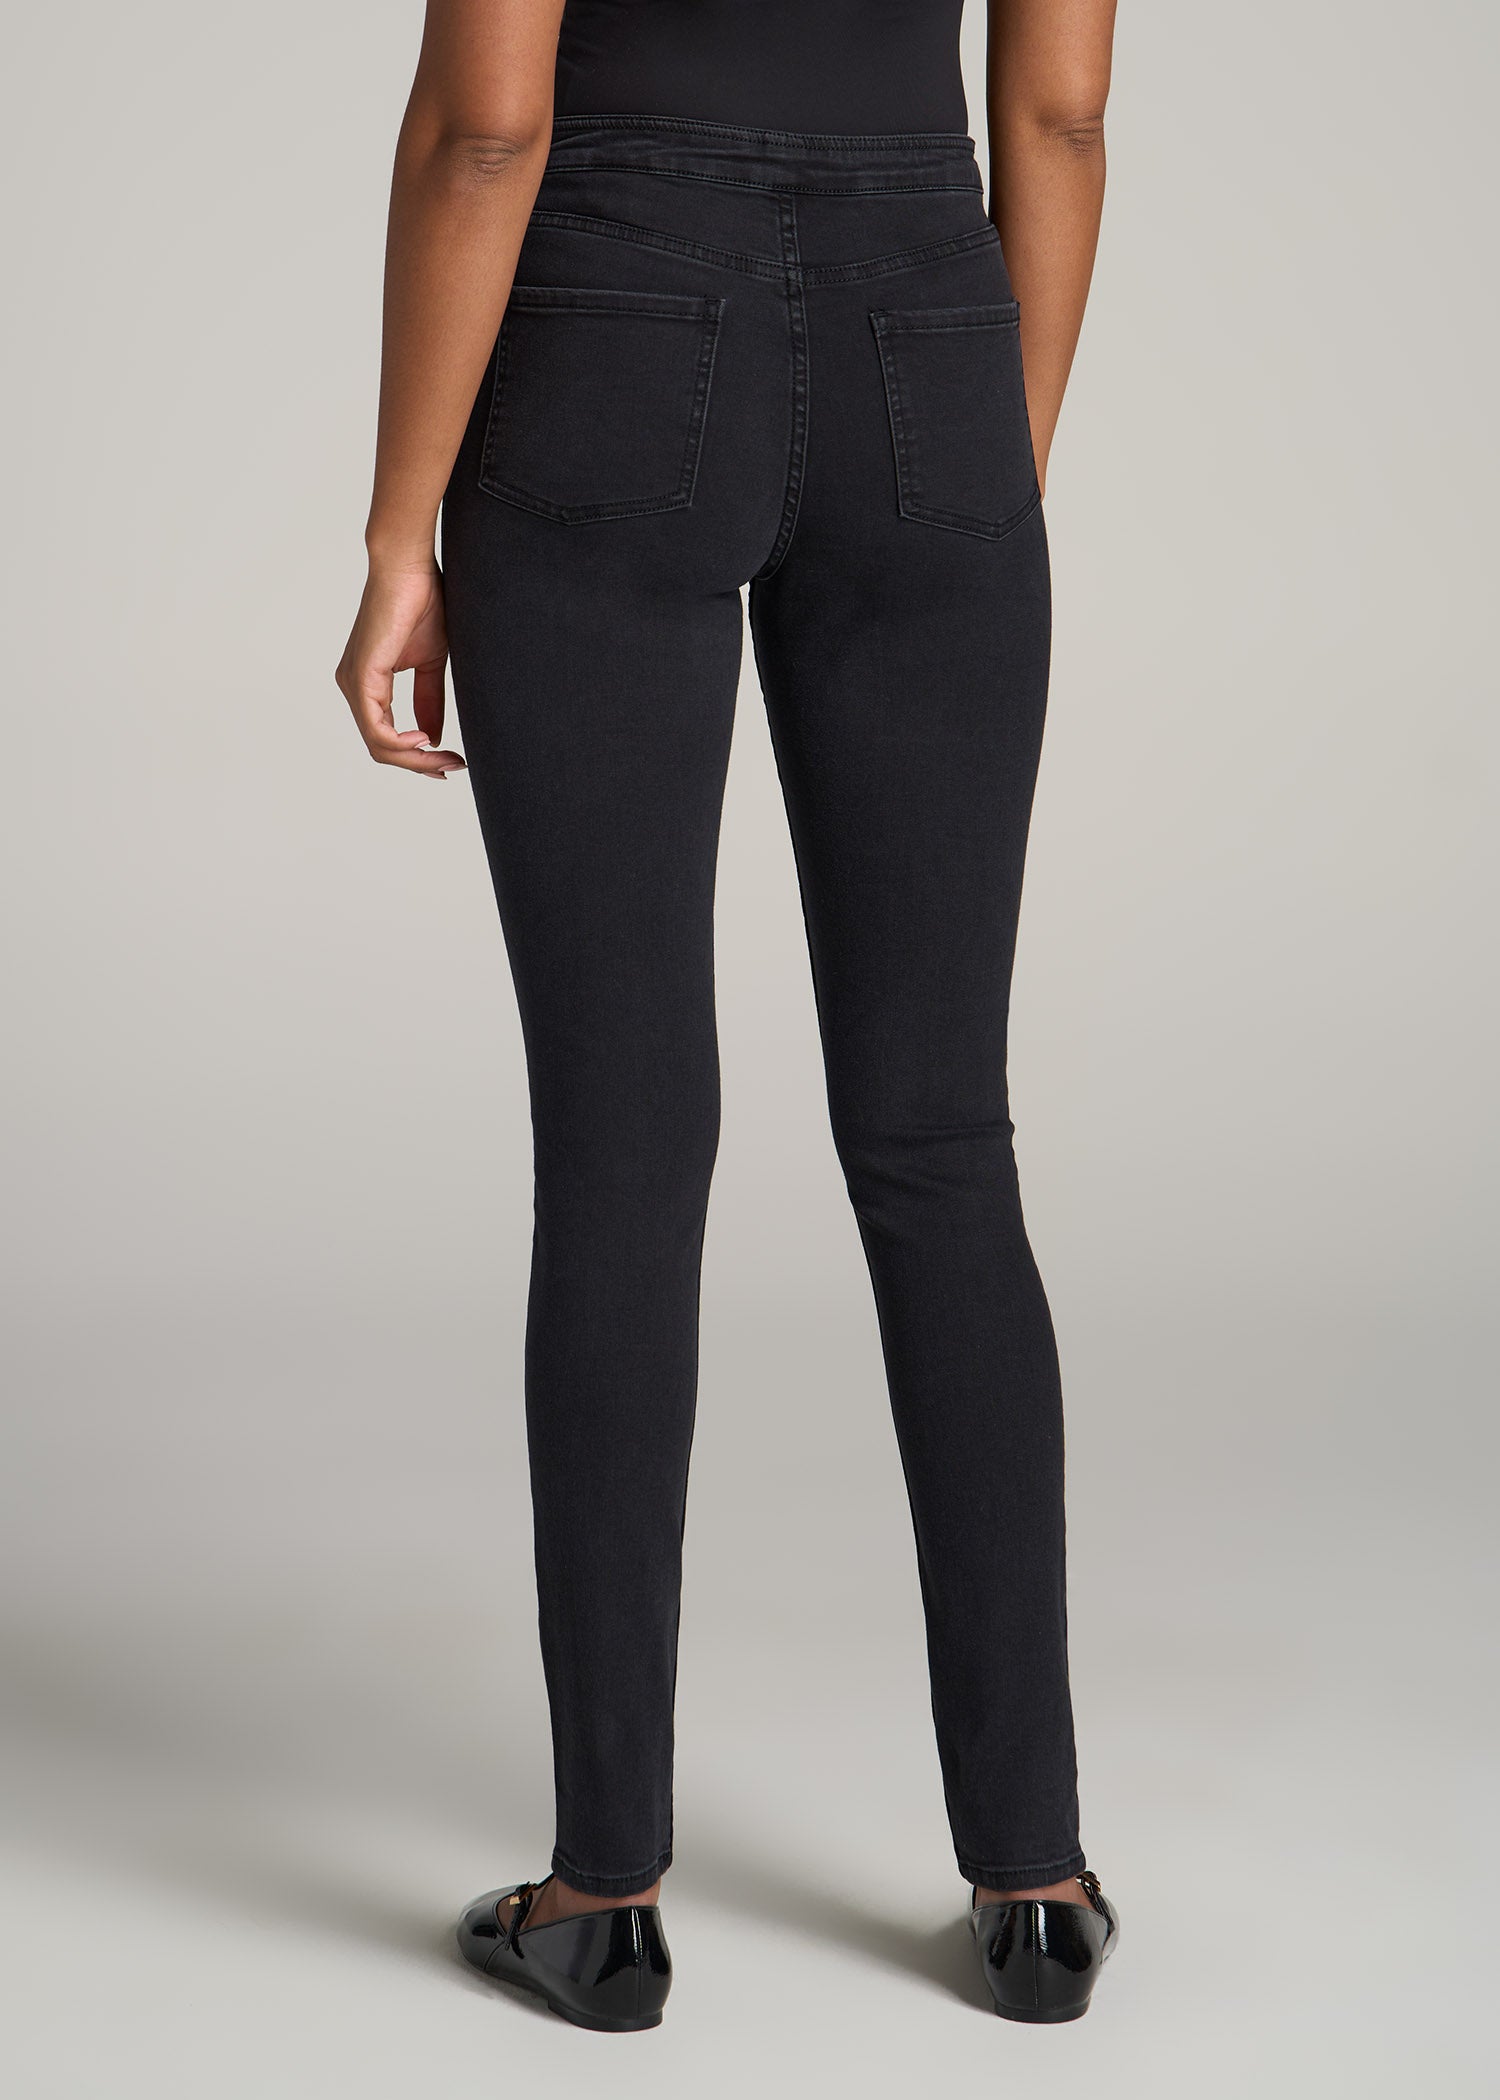 Denim Jegging - Curvy Fit - Black BLACK | Womens Talbots Jeans — Bypaths  and Beyond